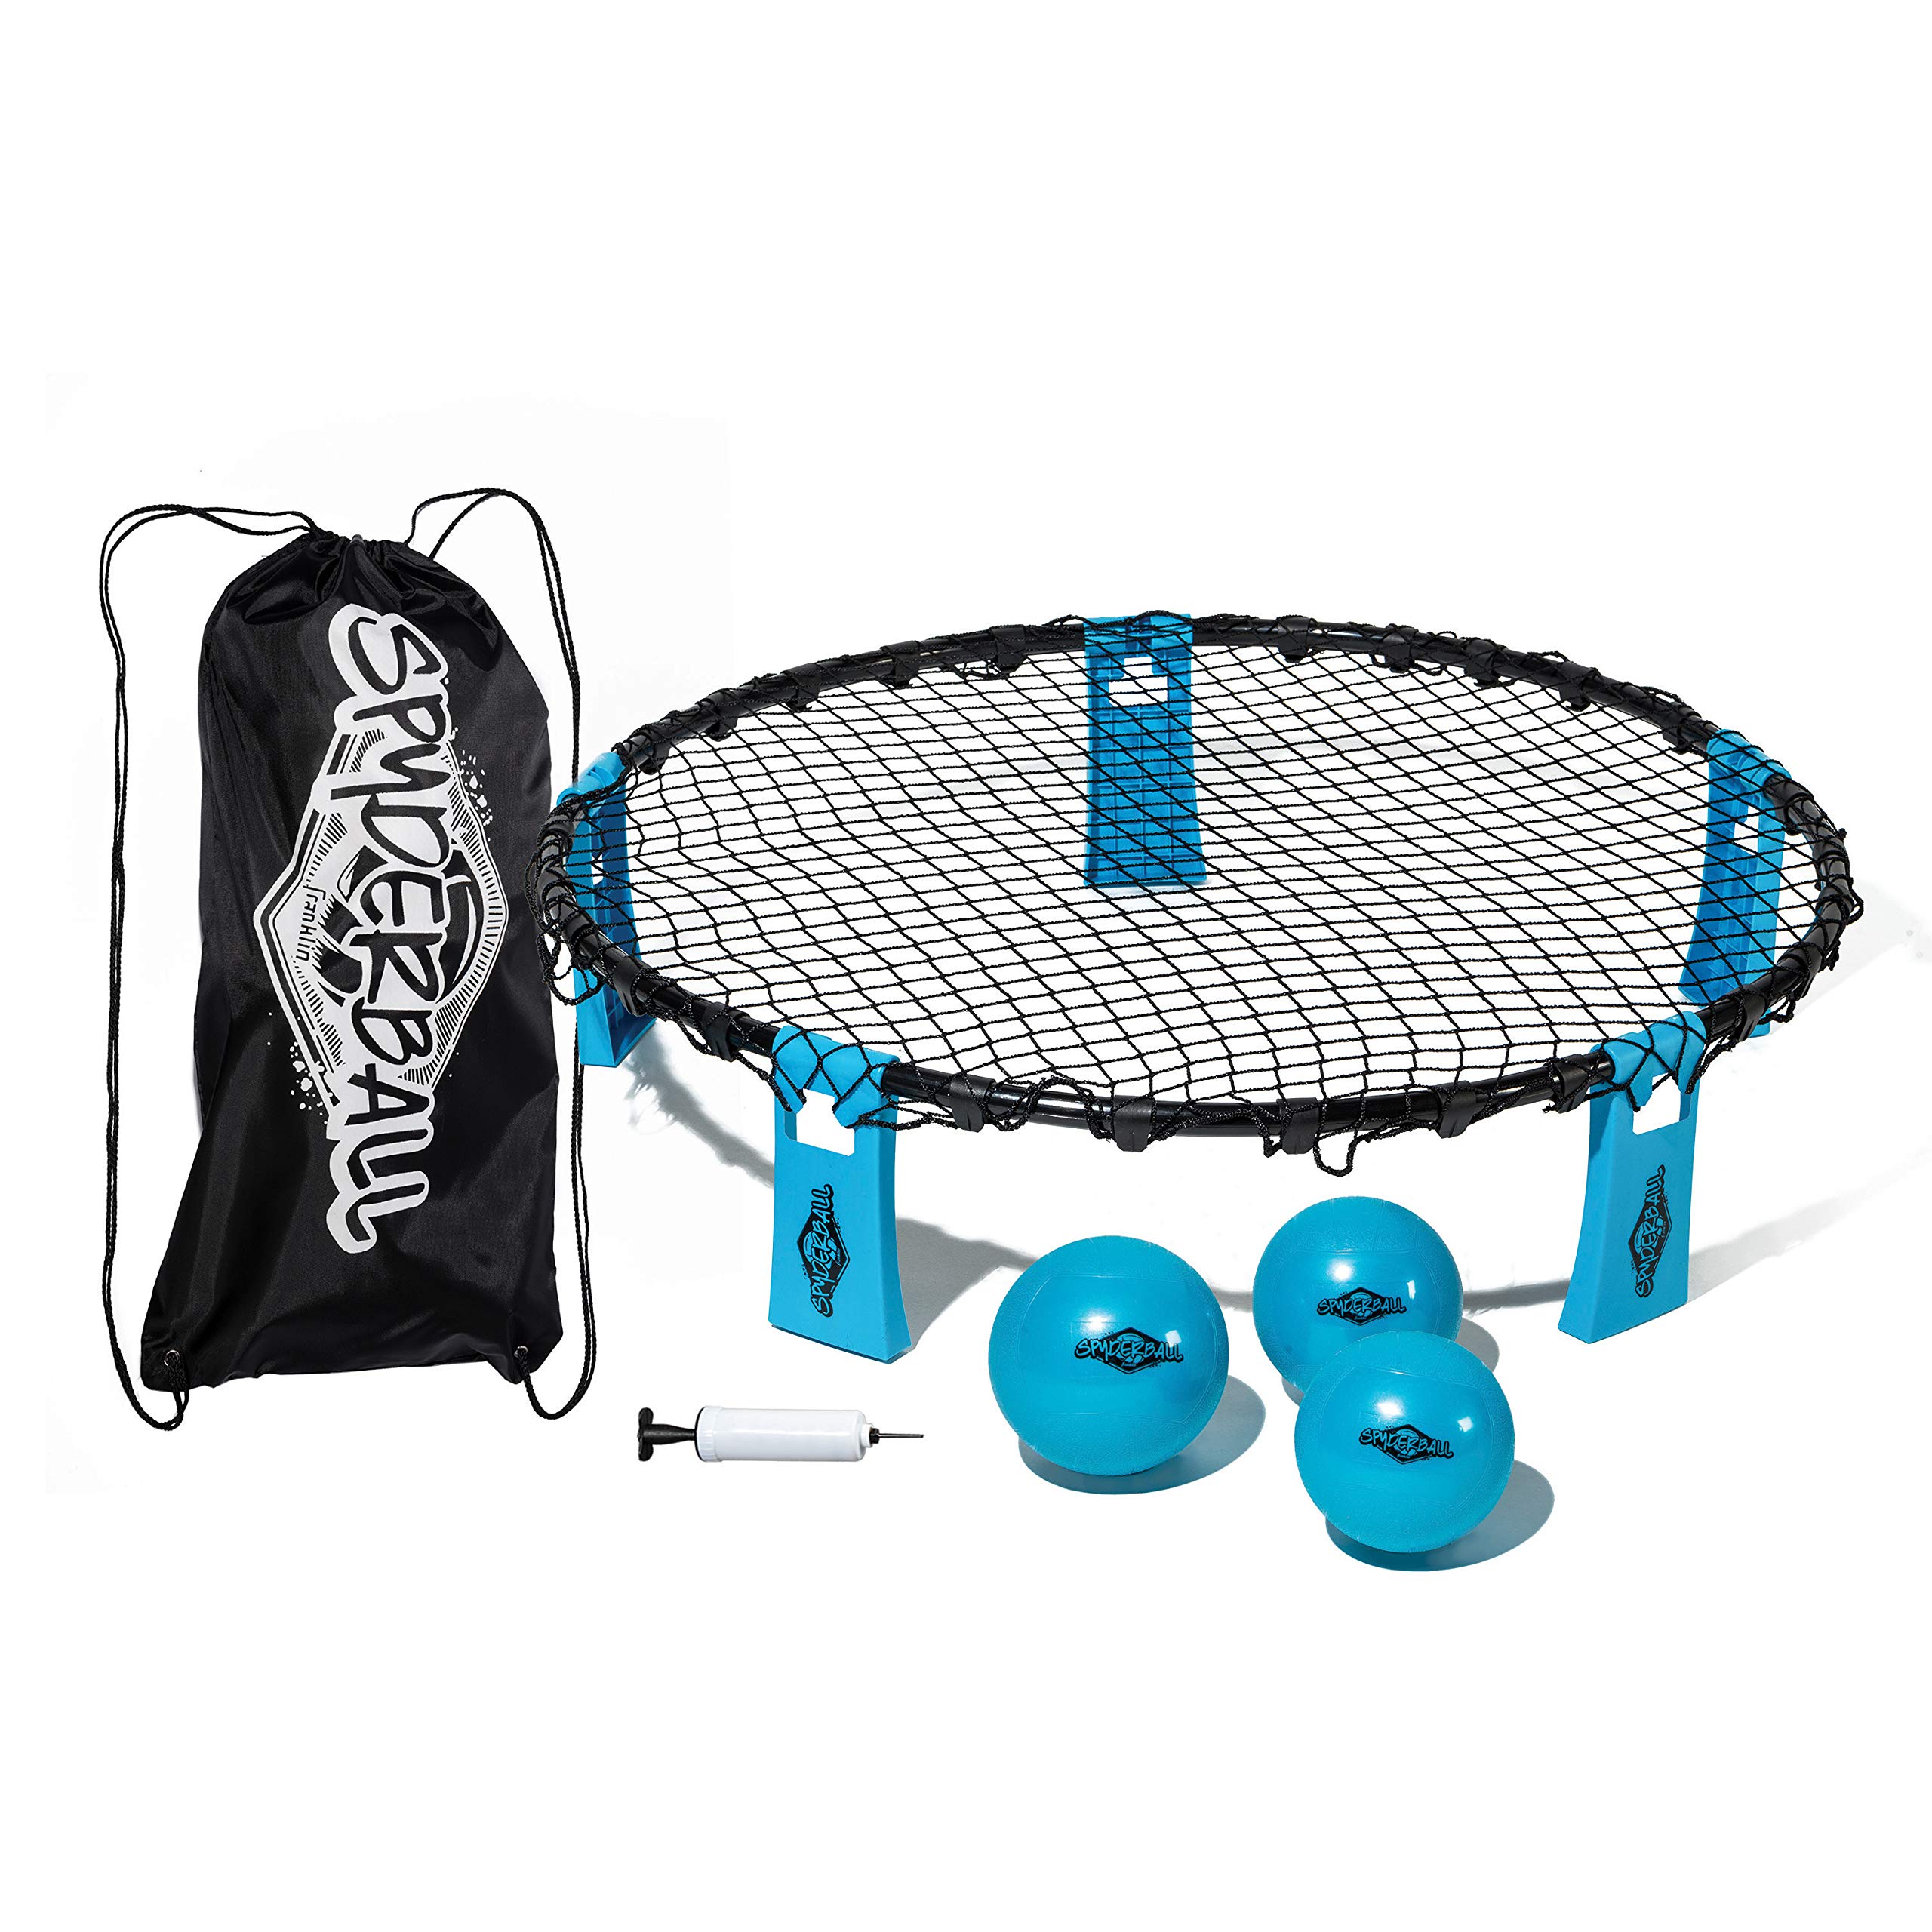 Franklin Sports Spyderball Game Set - Includes 3 Balls, Carrying Case and Rules - Played Outdoors, Indoors, Yard, Lawn, Beach - Durable Tight Net